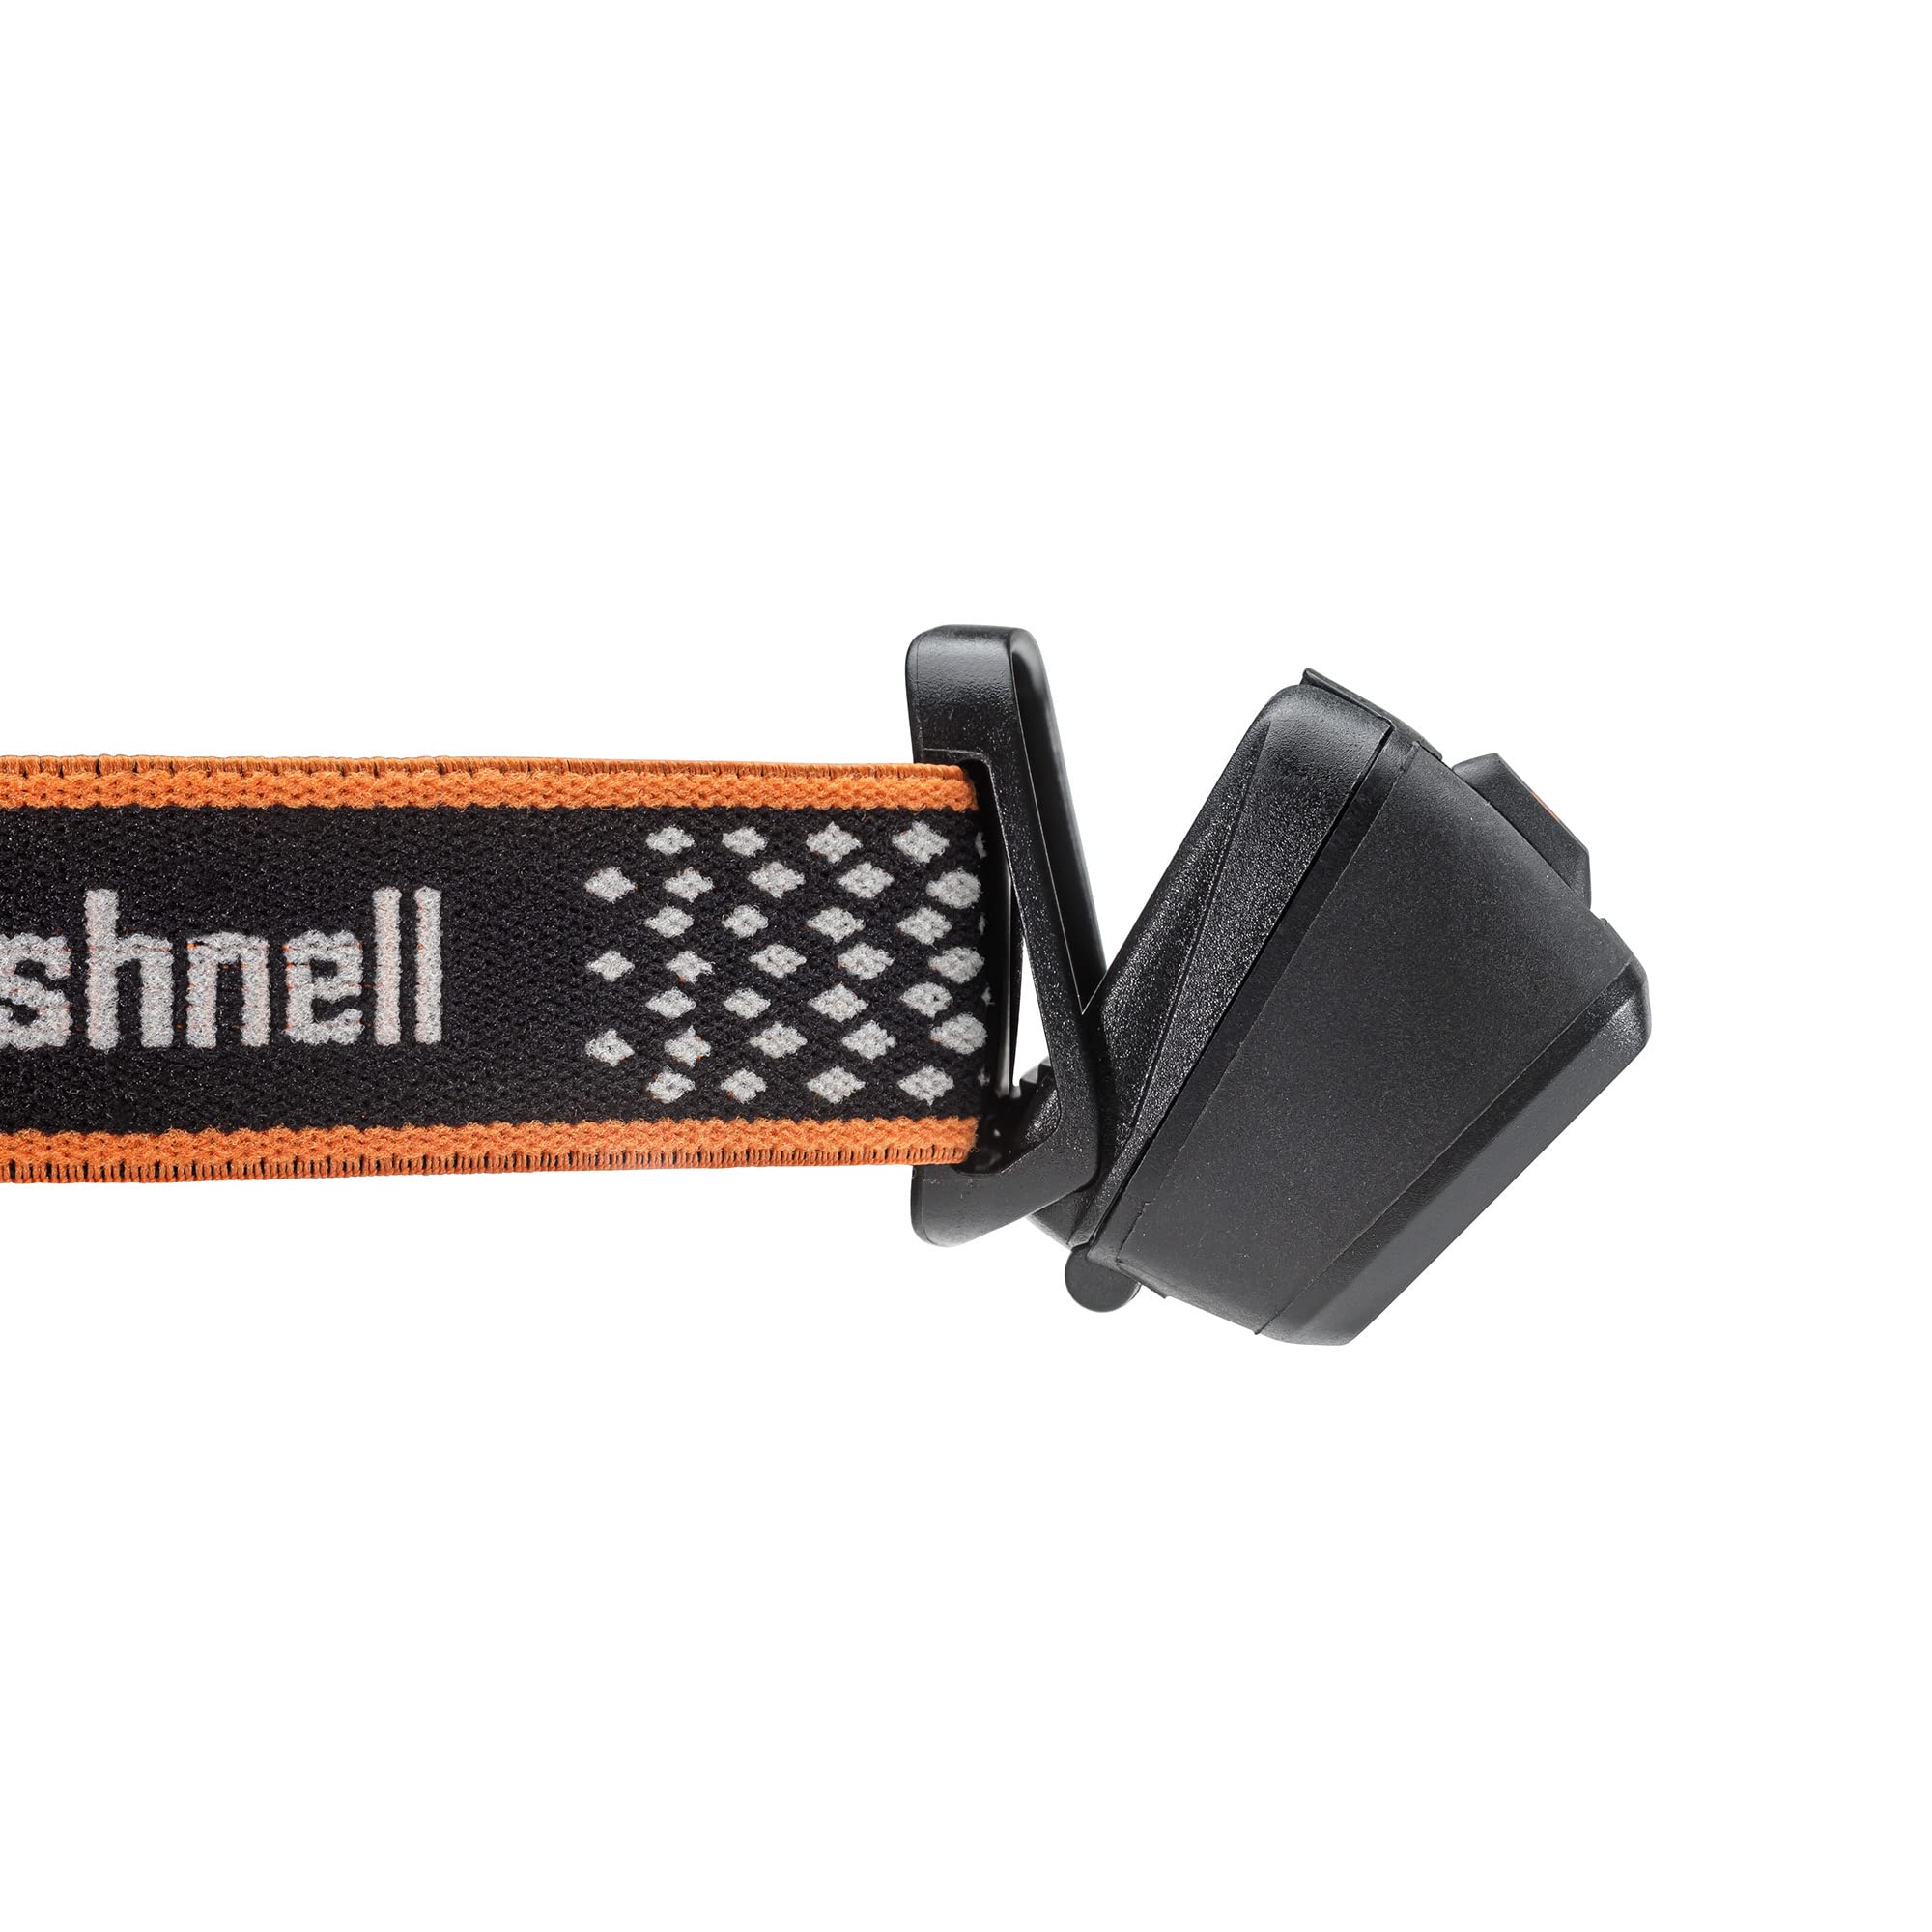 Bushnell Power+ 500L LED Headlamp - Flexible Power, Water Resistant, Rechargeable, Adjustable Band, Red Mode